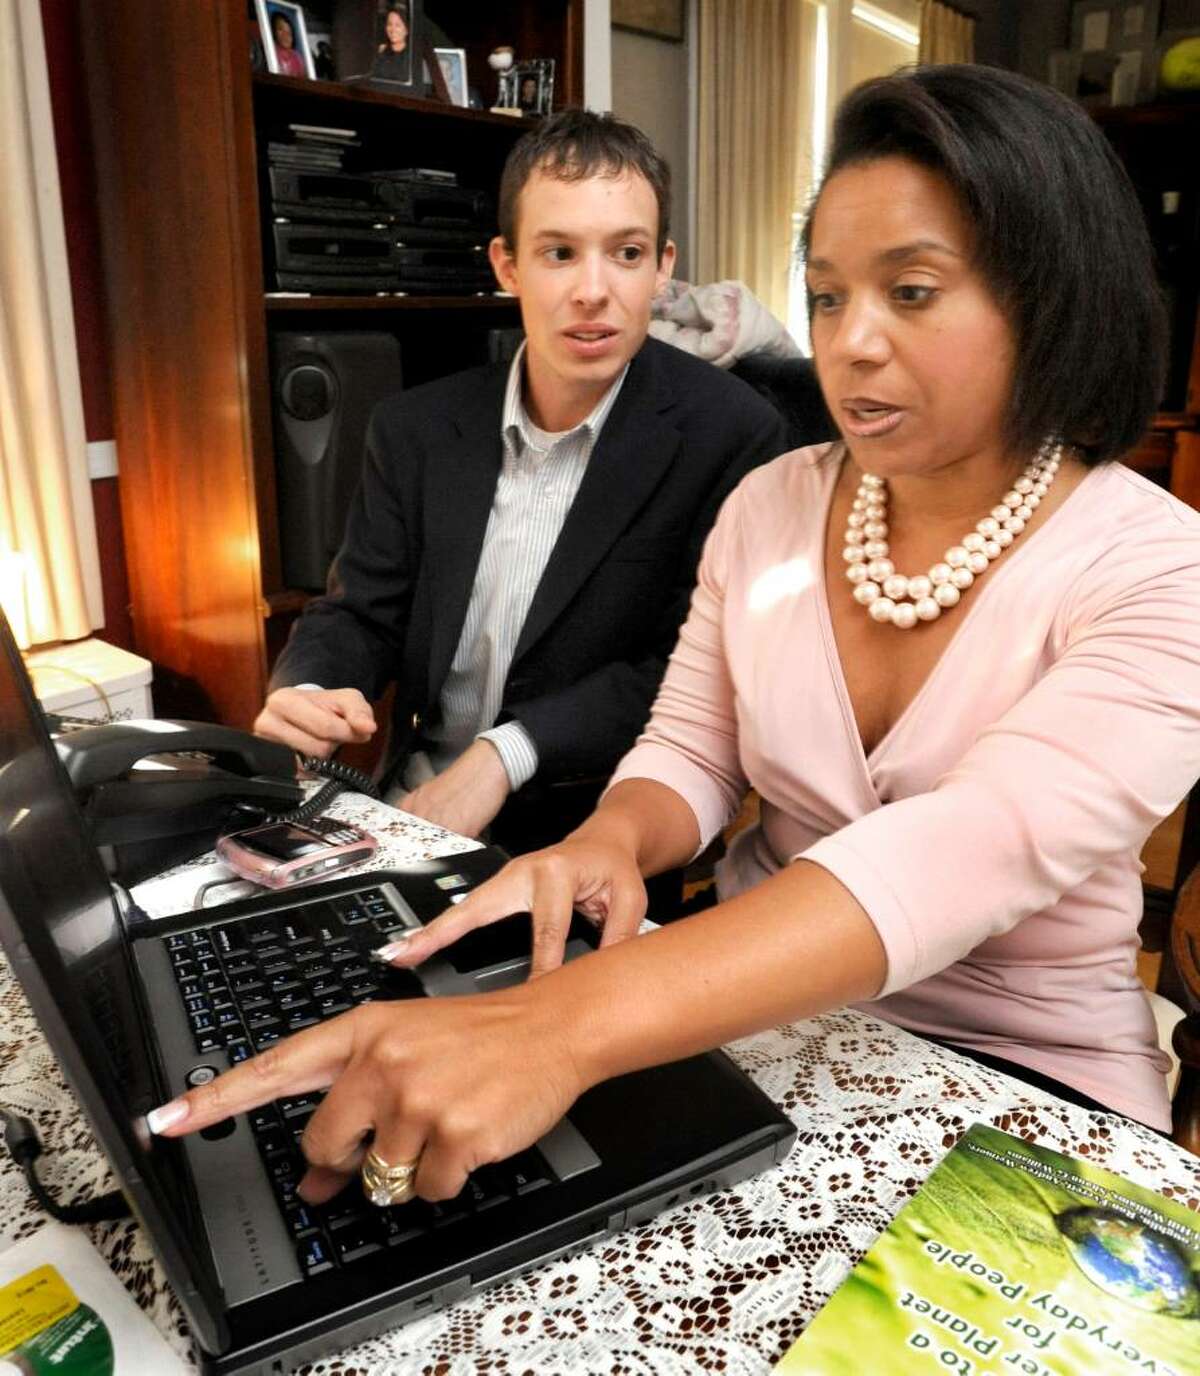 Andrew Wetmore and Gail Hill Williams discuss layout for a book they are co-authoring in Williams home office in danbury on Aug. 31,2009.